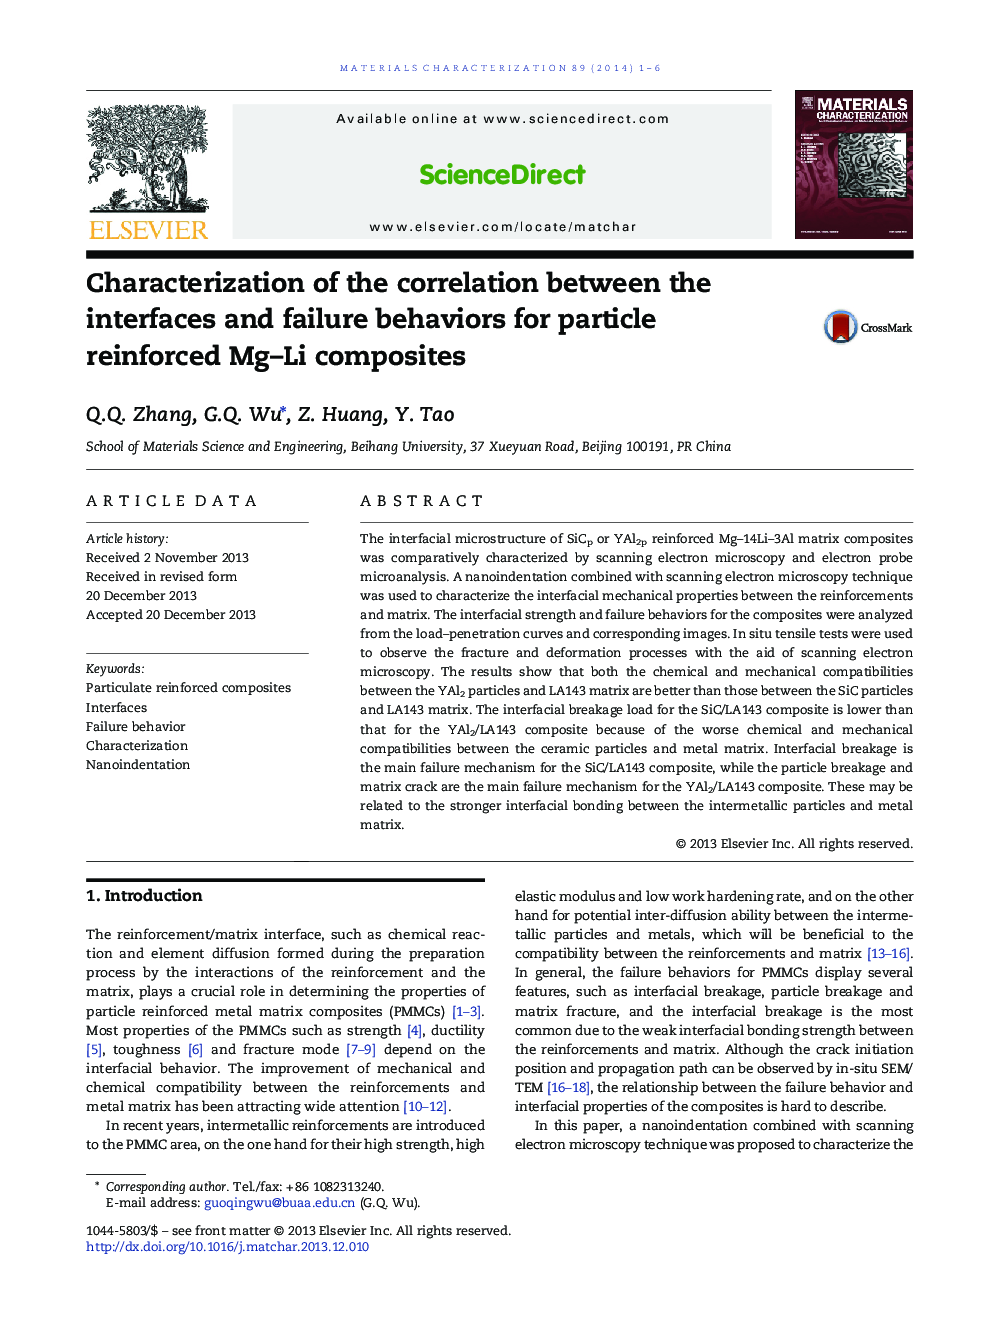 Characterization of the correlation between the interfaces and failure behaviors for particle reinforced Mg-Li composites